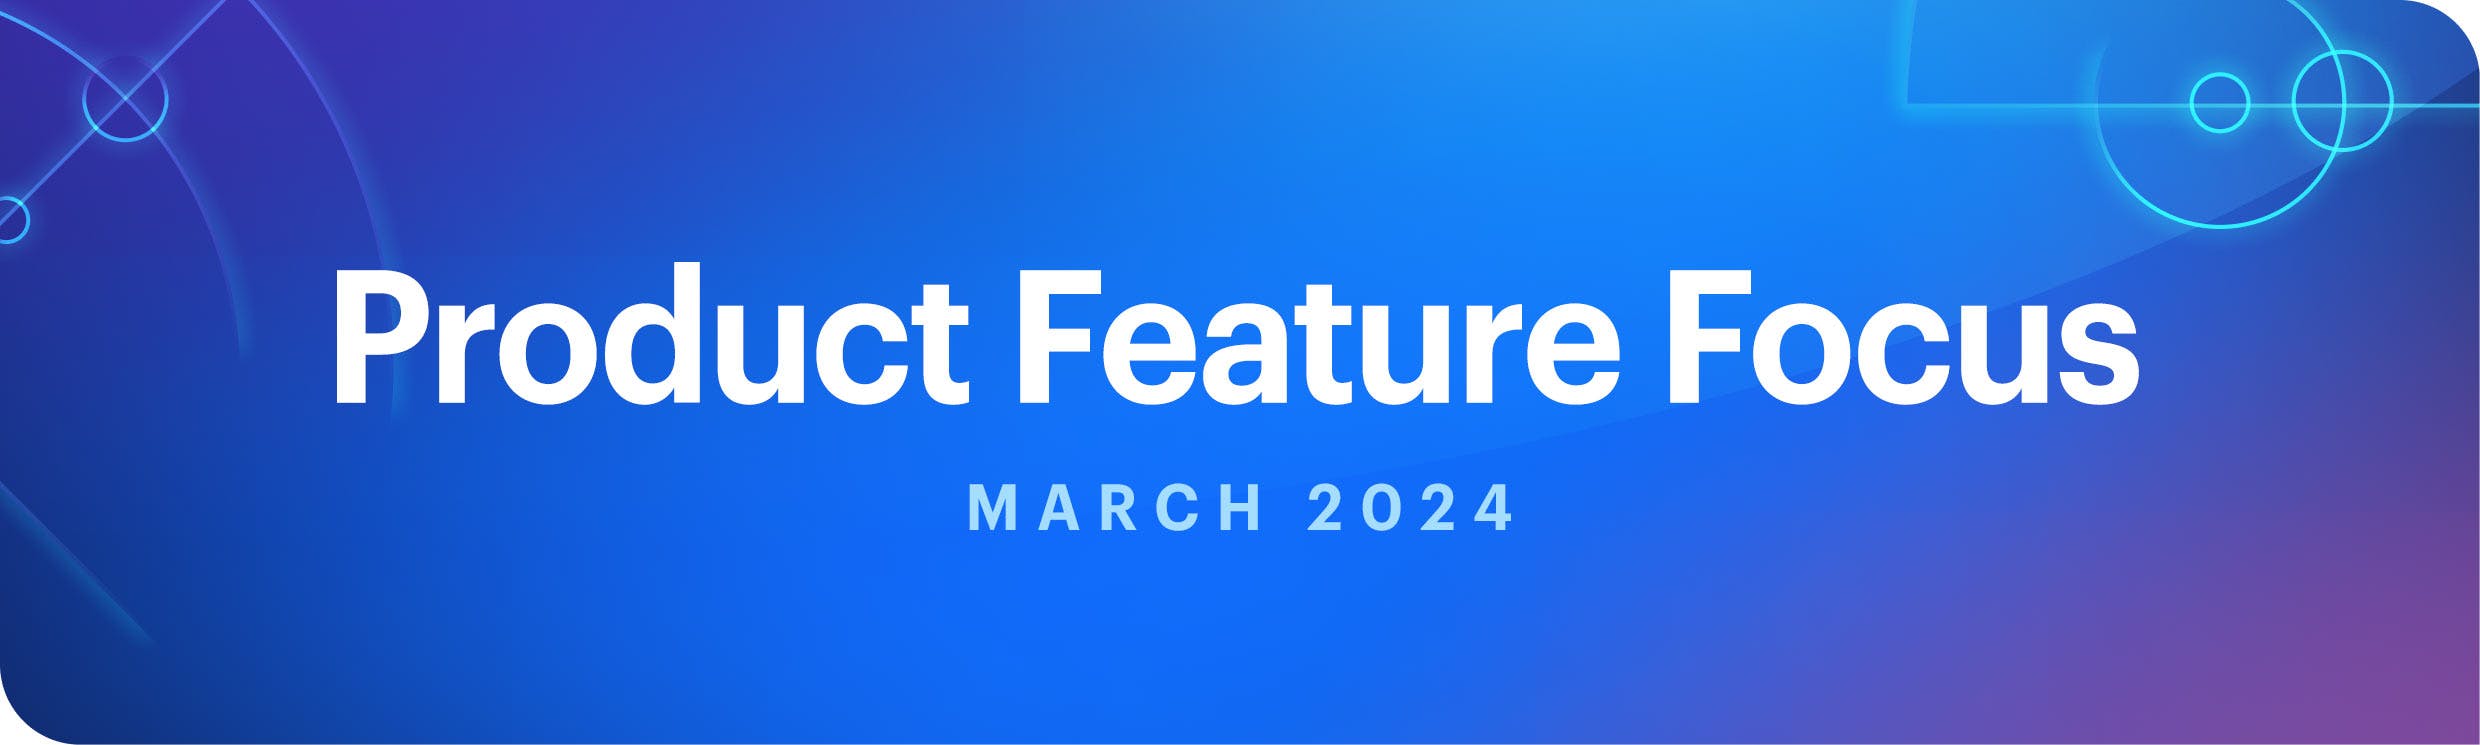 Product Feature Focus: March 2024